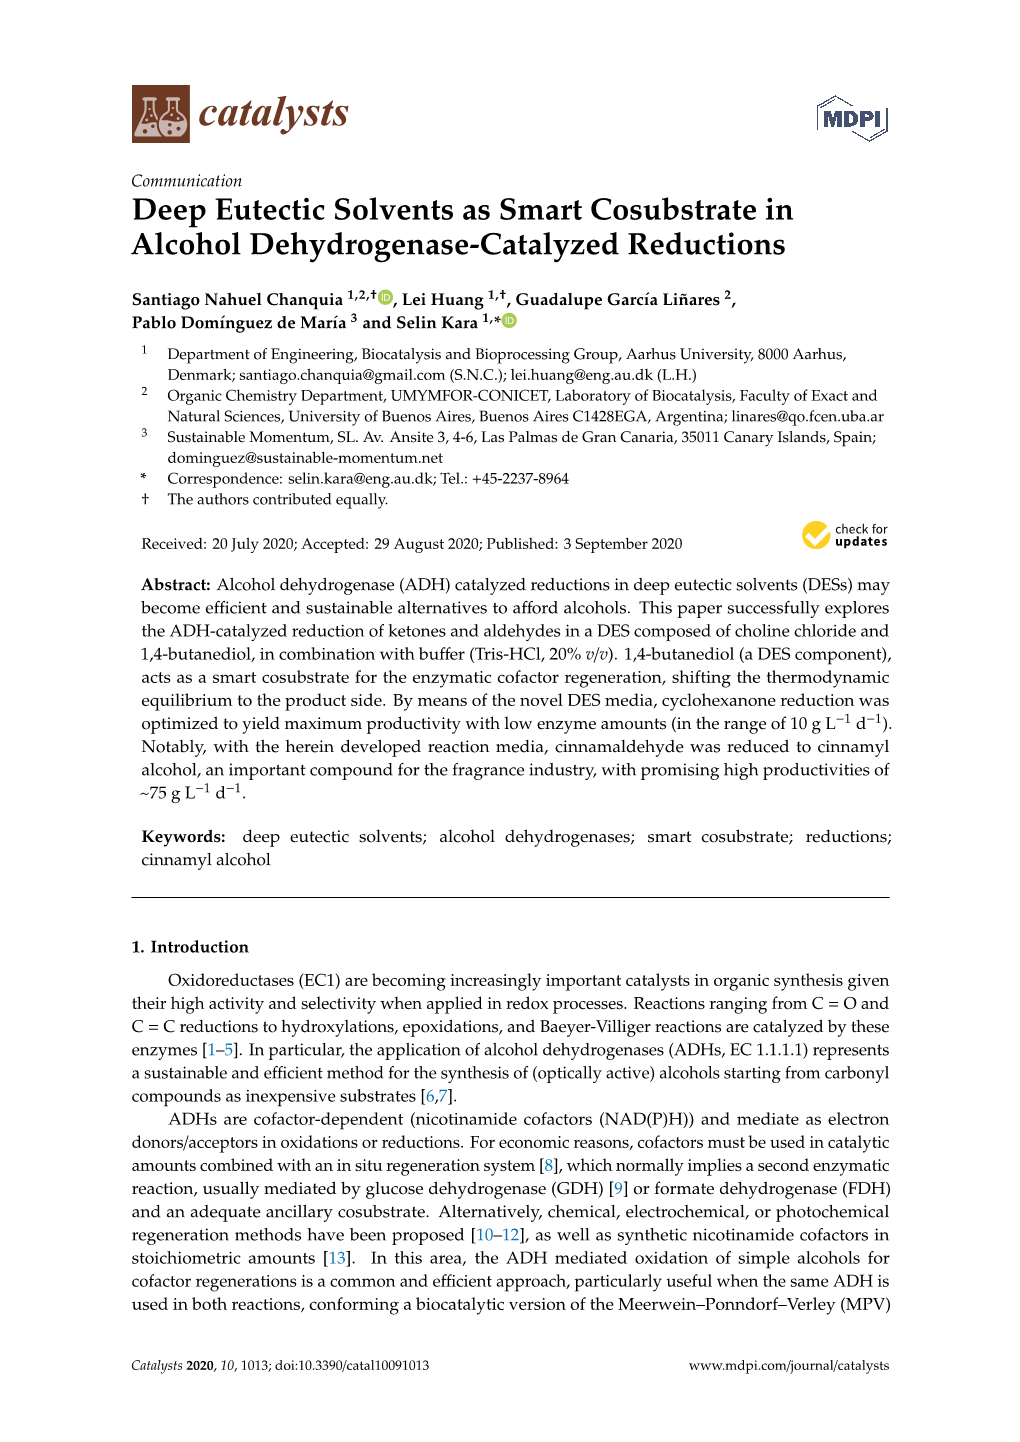 Deep Eutectic Solvents As Smart Cosubstrate in Alcohol Dehydrogenase-Catalyzed Reductions